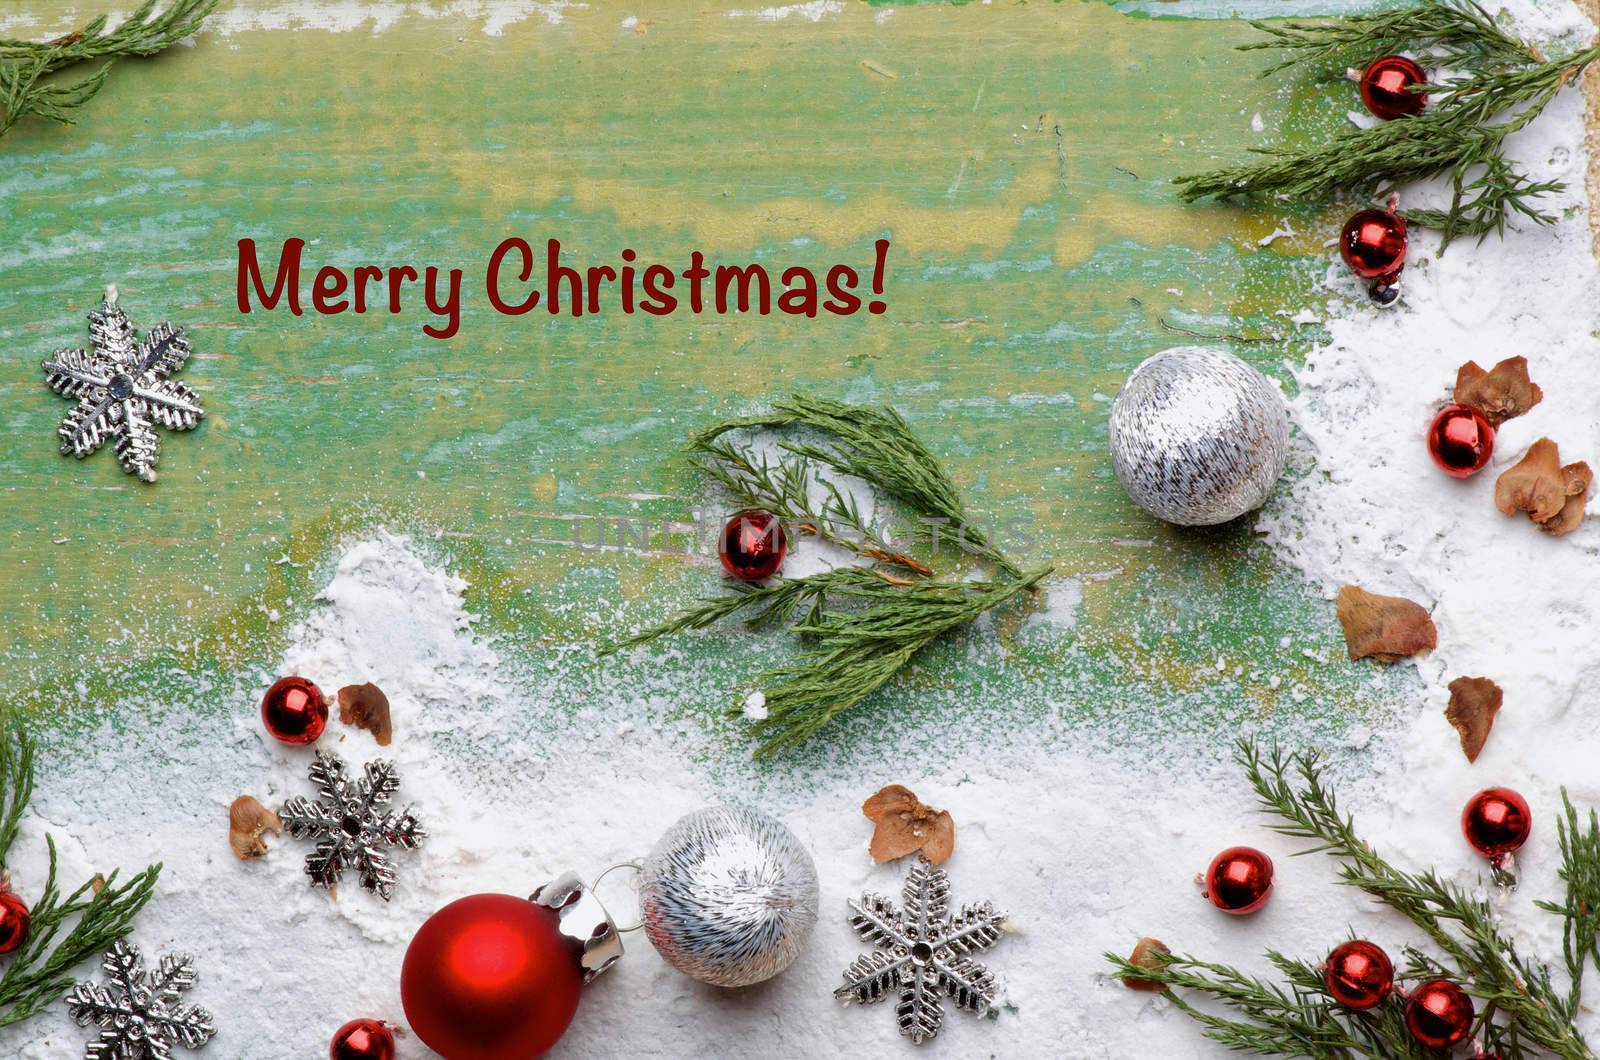 Christmas Greeting Card with Corner Borders of Green Branches, Snow Flakes, Red Baubles and Silver Stars with Inscription closeup on Cracked Wooden background